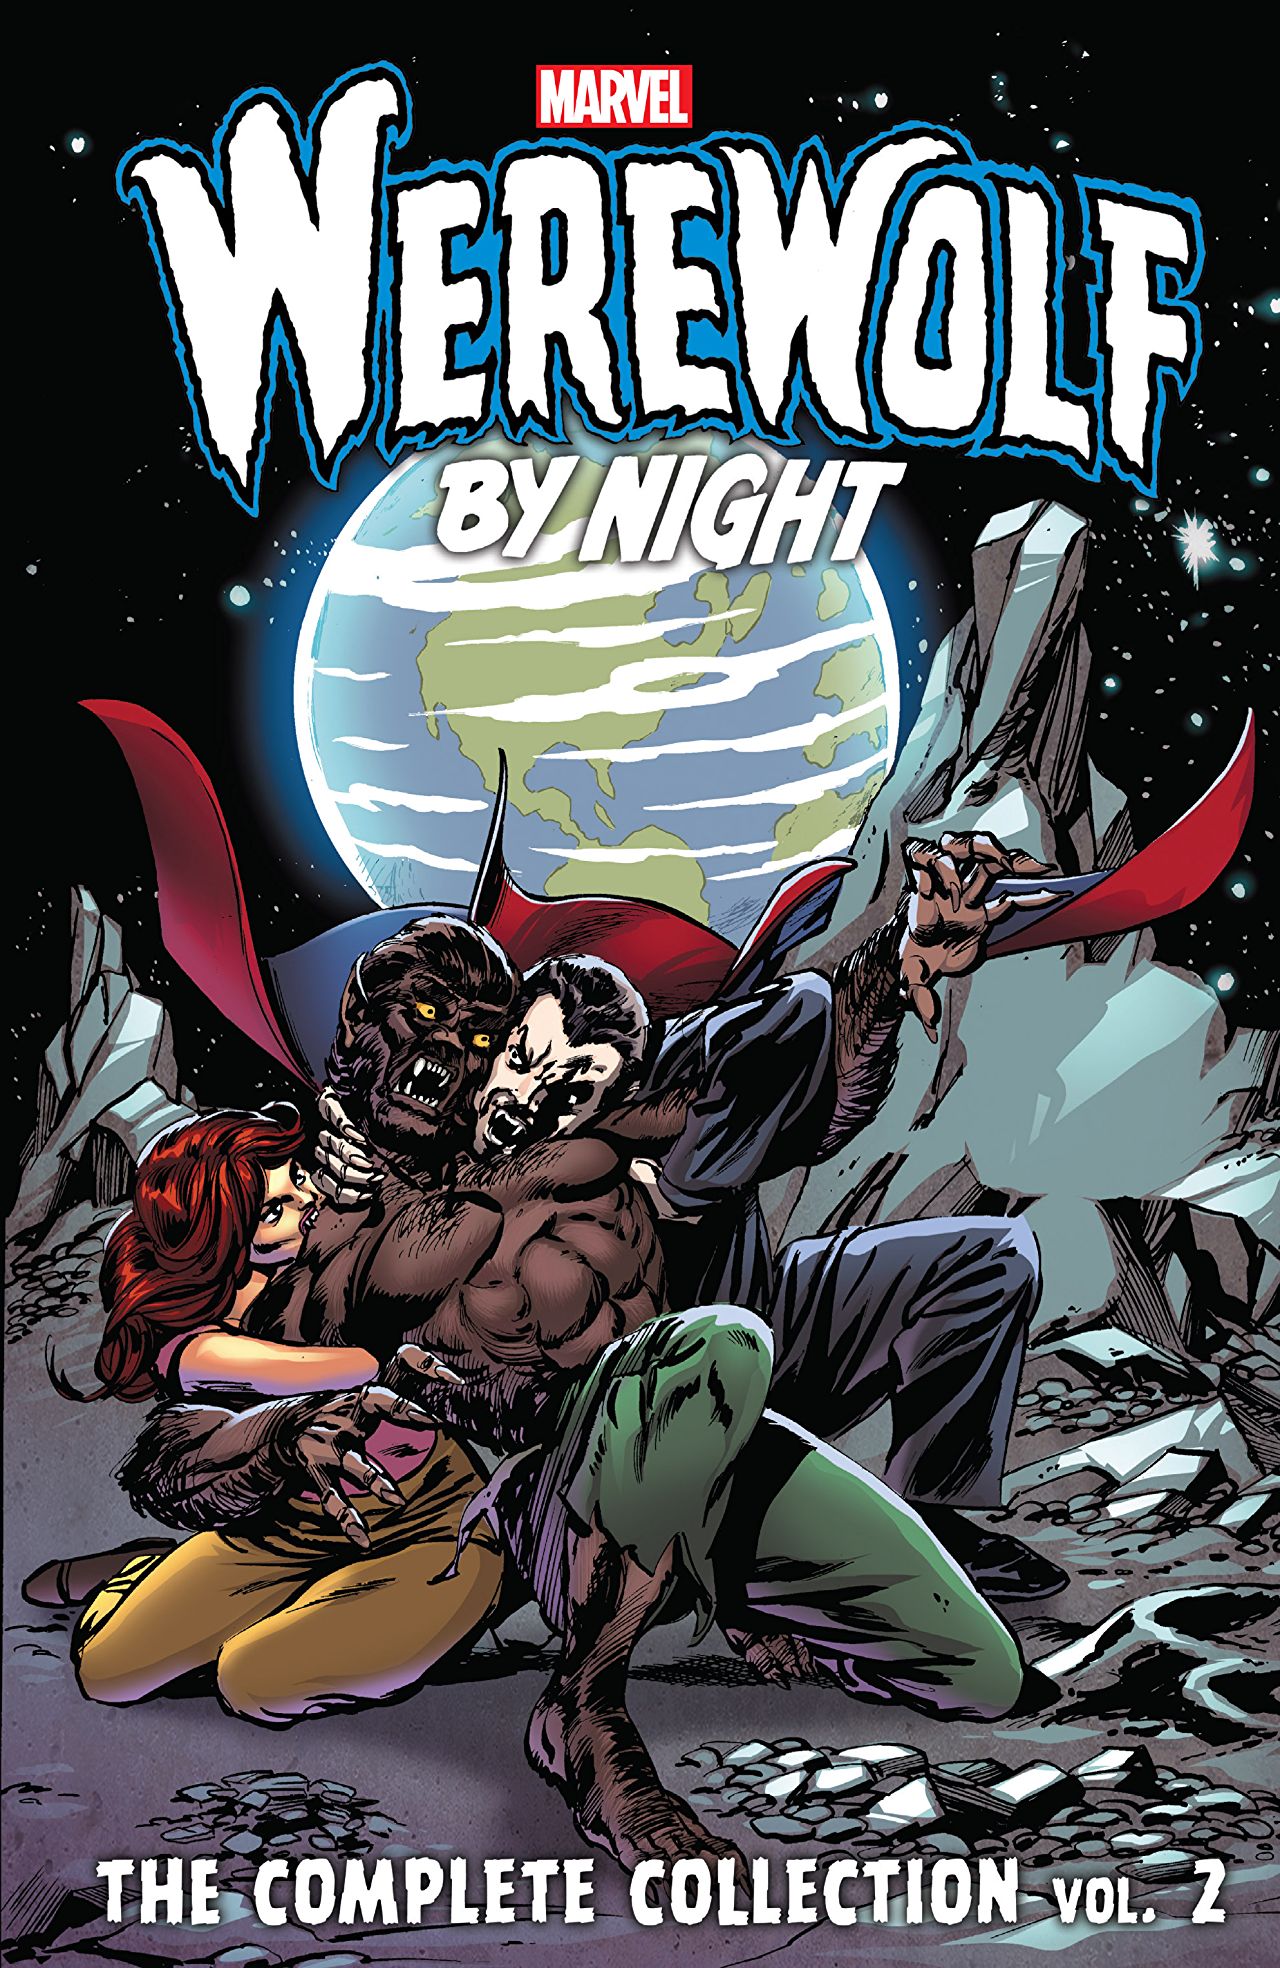 'Werewolf by Night: The Complete Collection' Vol. 2 is a ...